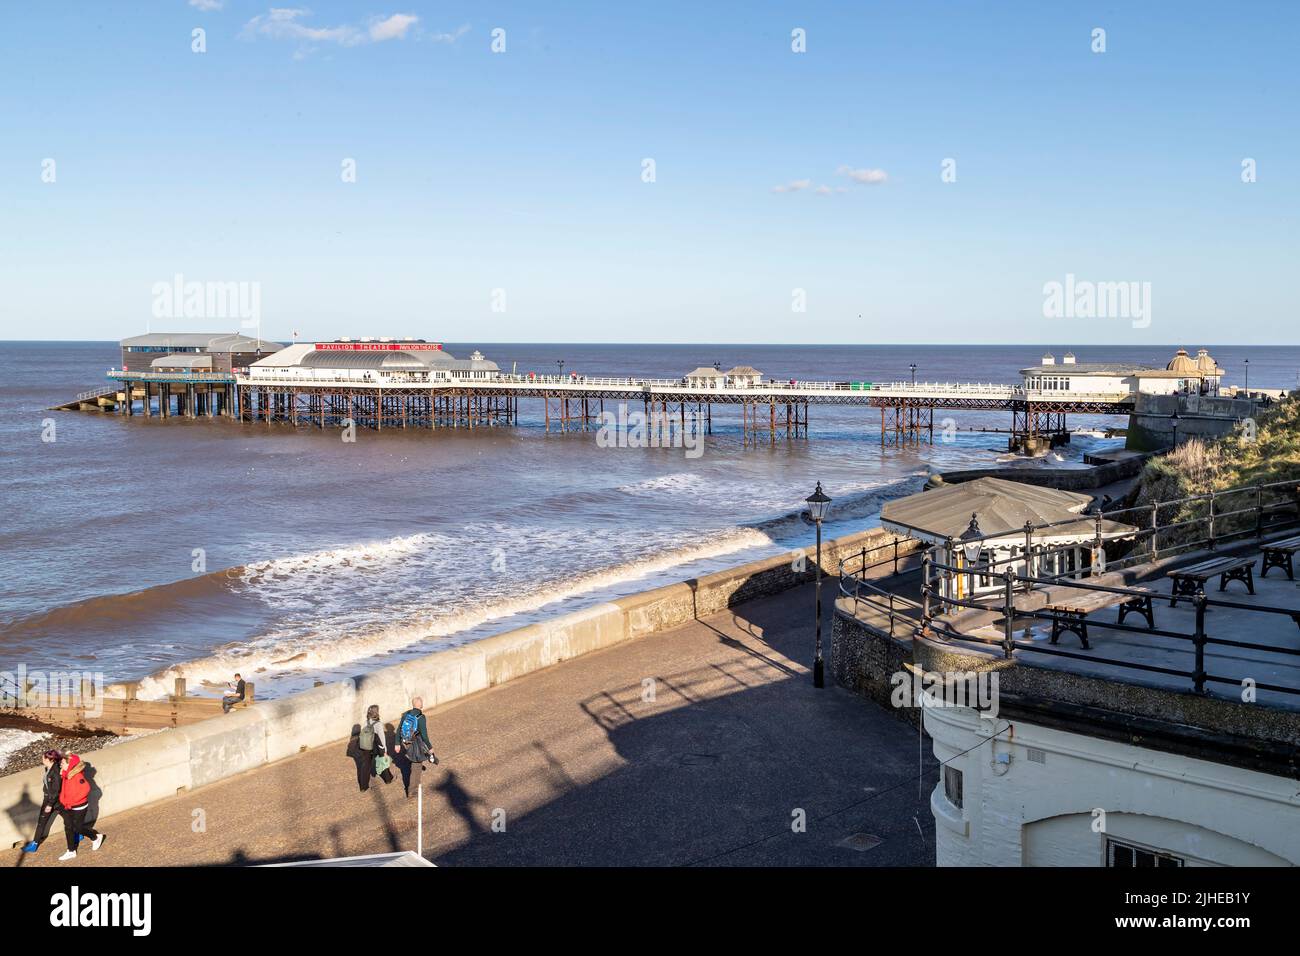 The Pier at Cromer on the North Norfolk coast a popular staycation location. East Anglia, England, UK. Stock Photo